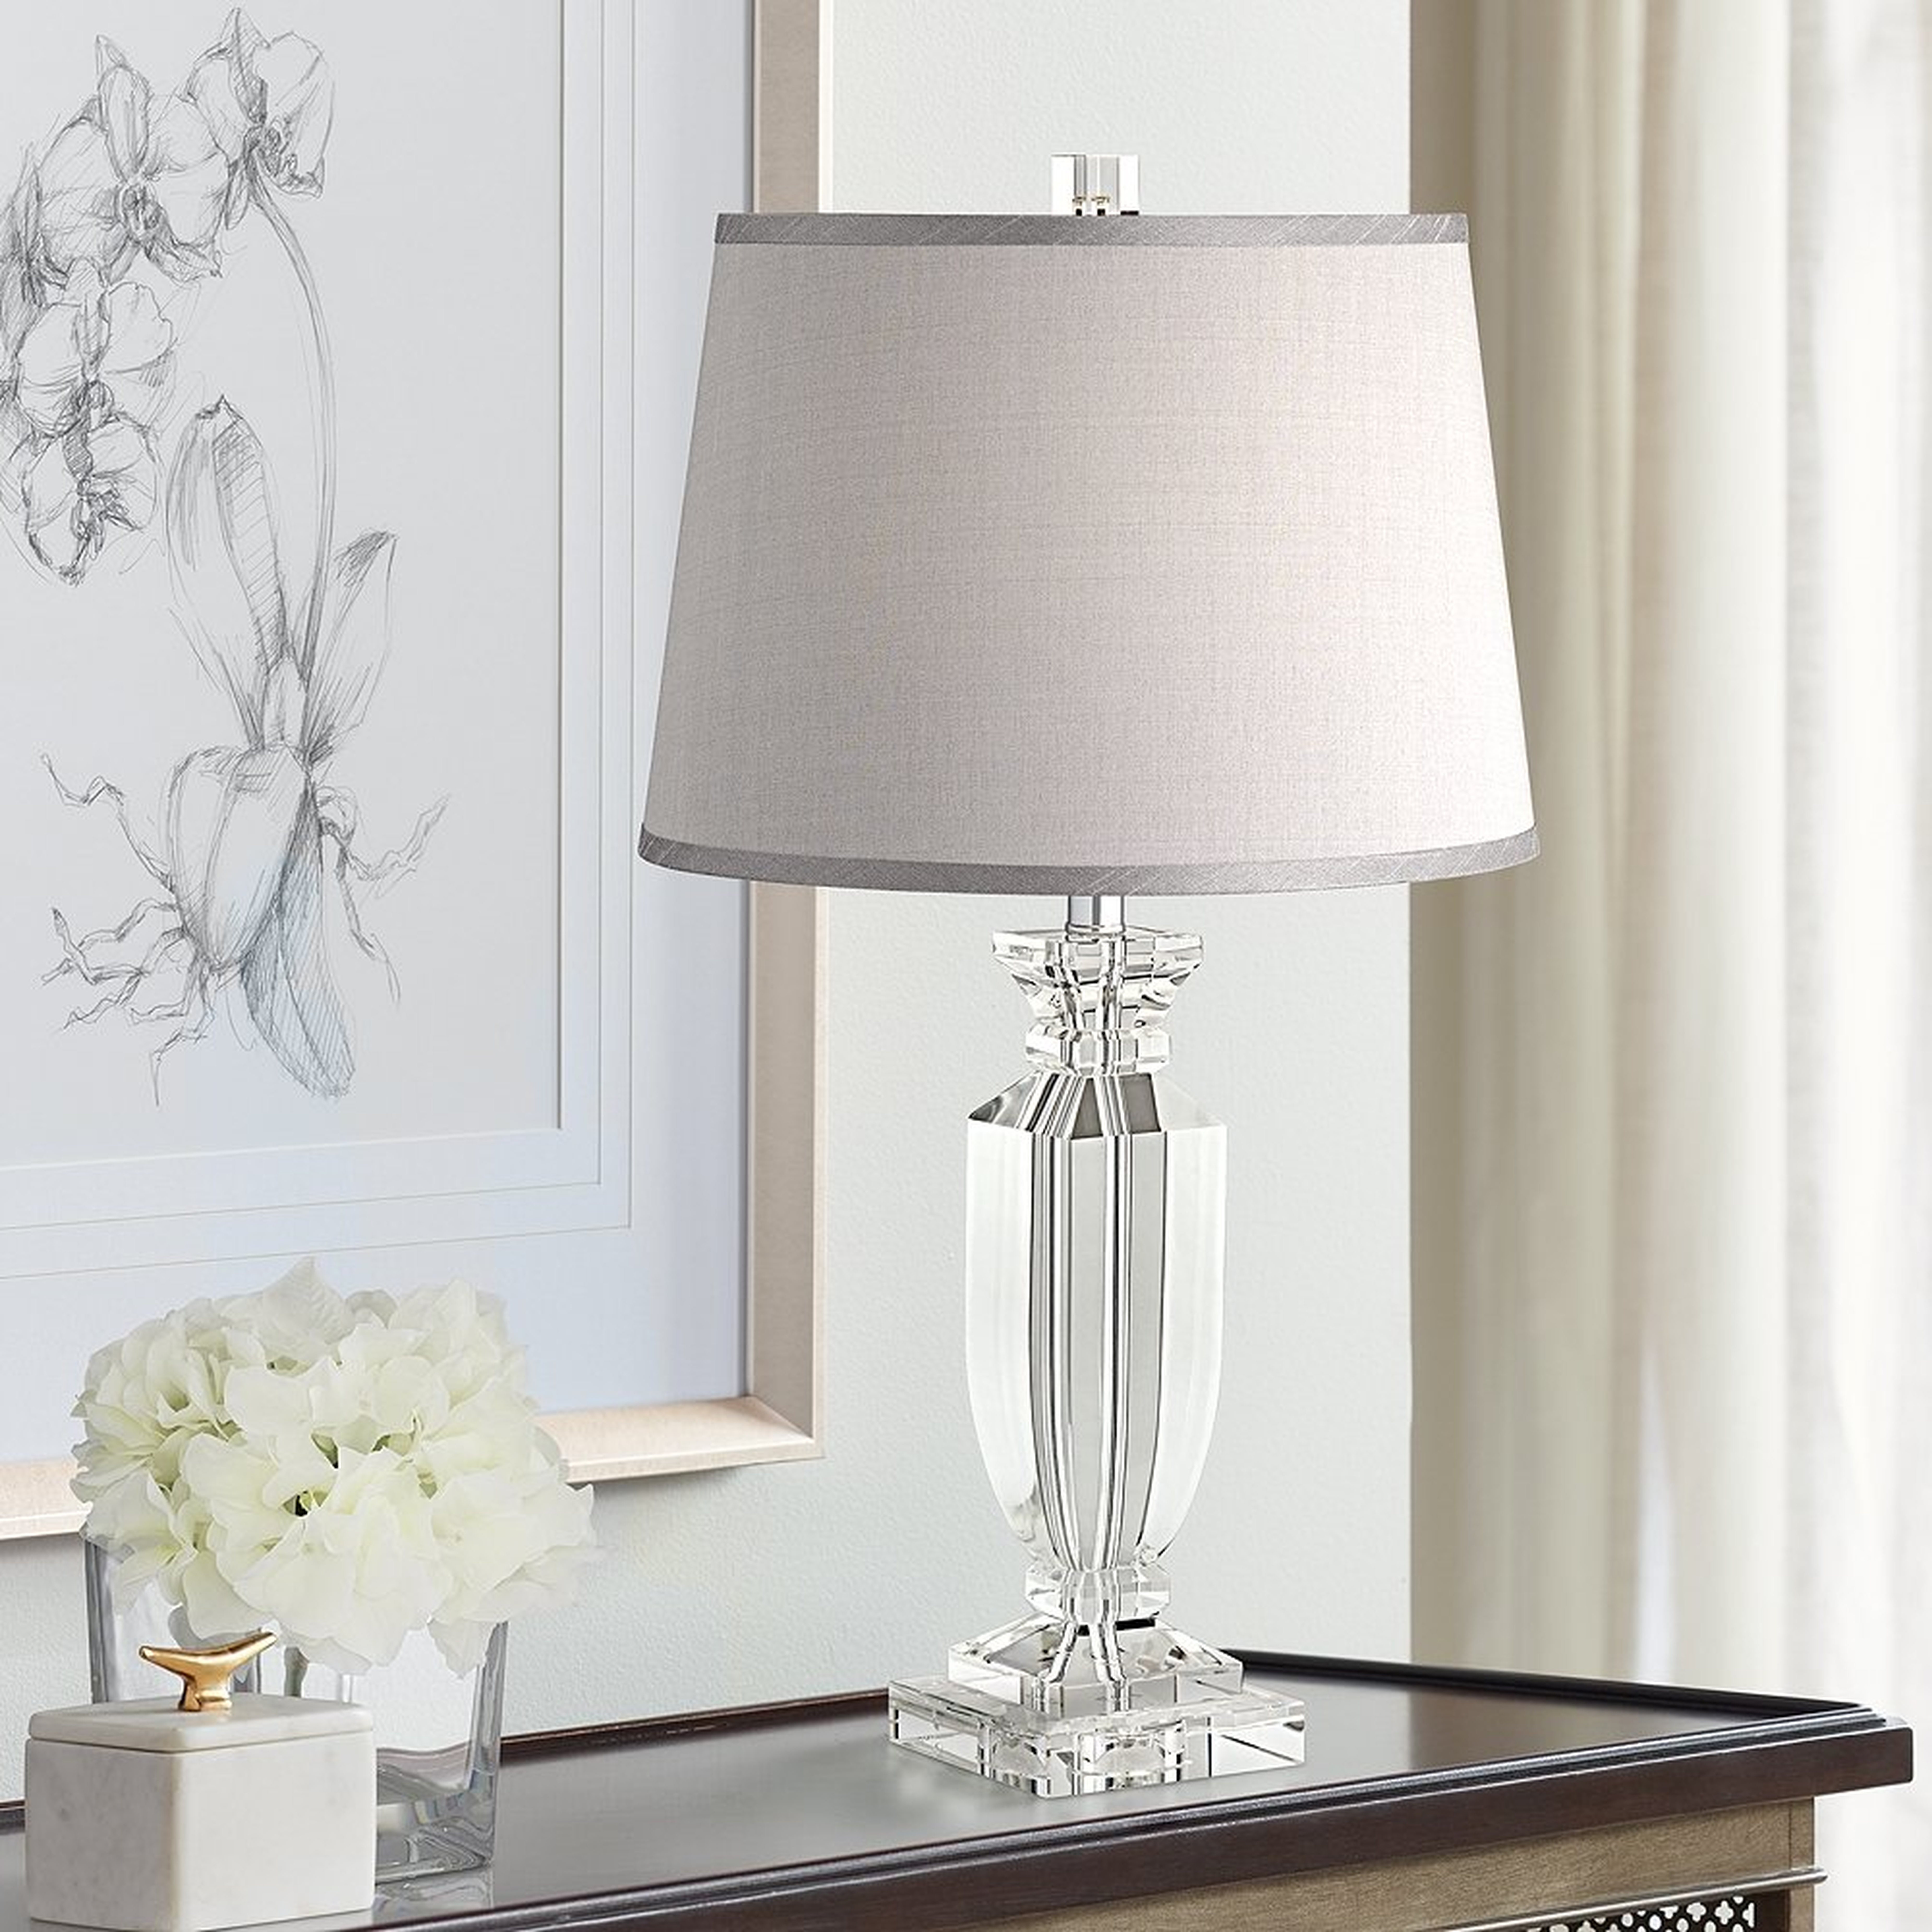 Sherry Crystal Table Lamp with Gray Shade - Style # 53X57 - Lamps Plus